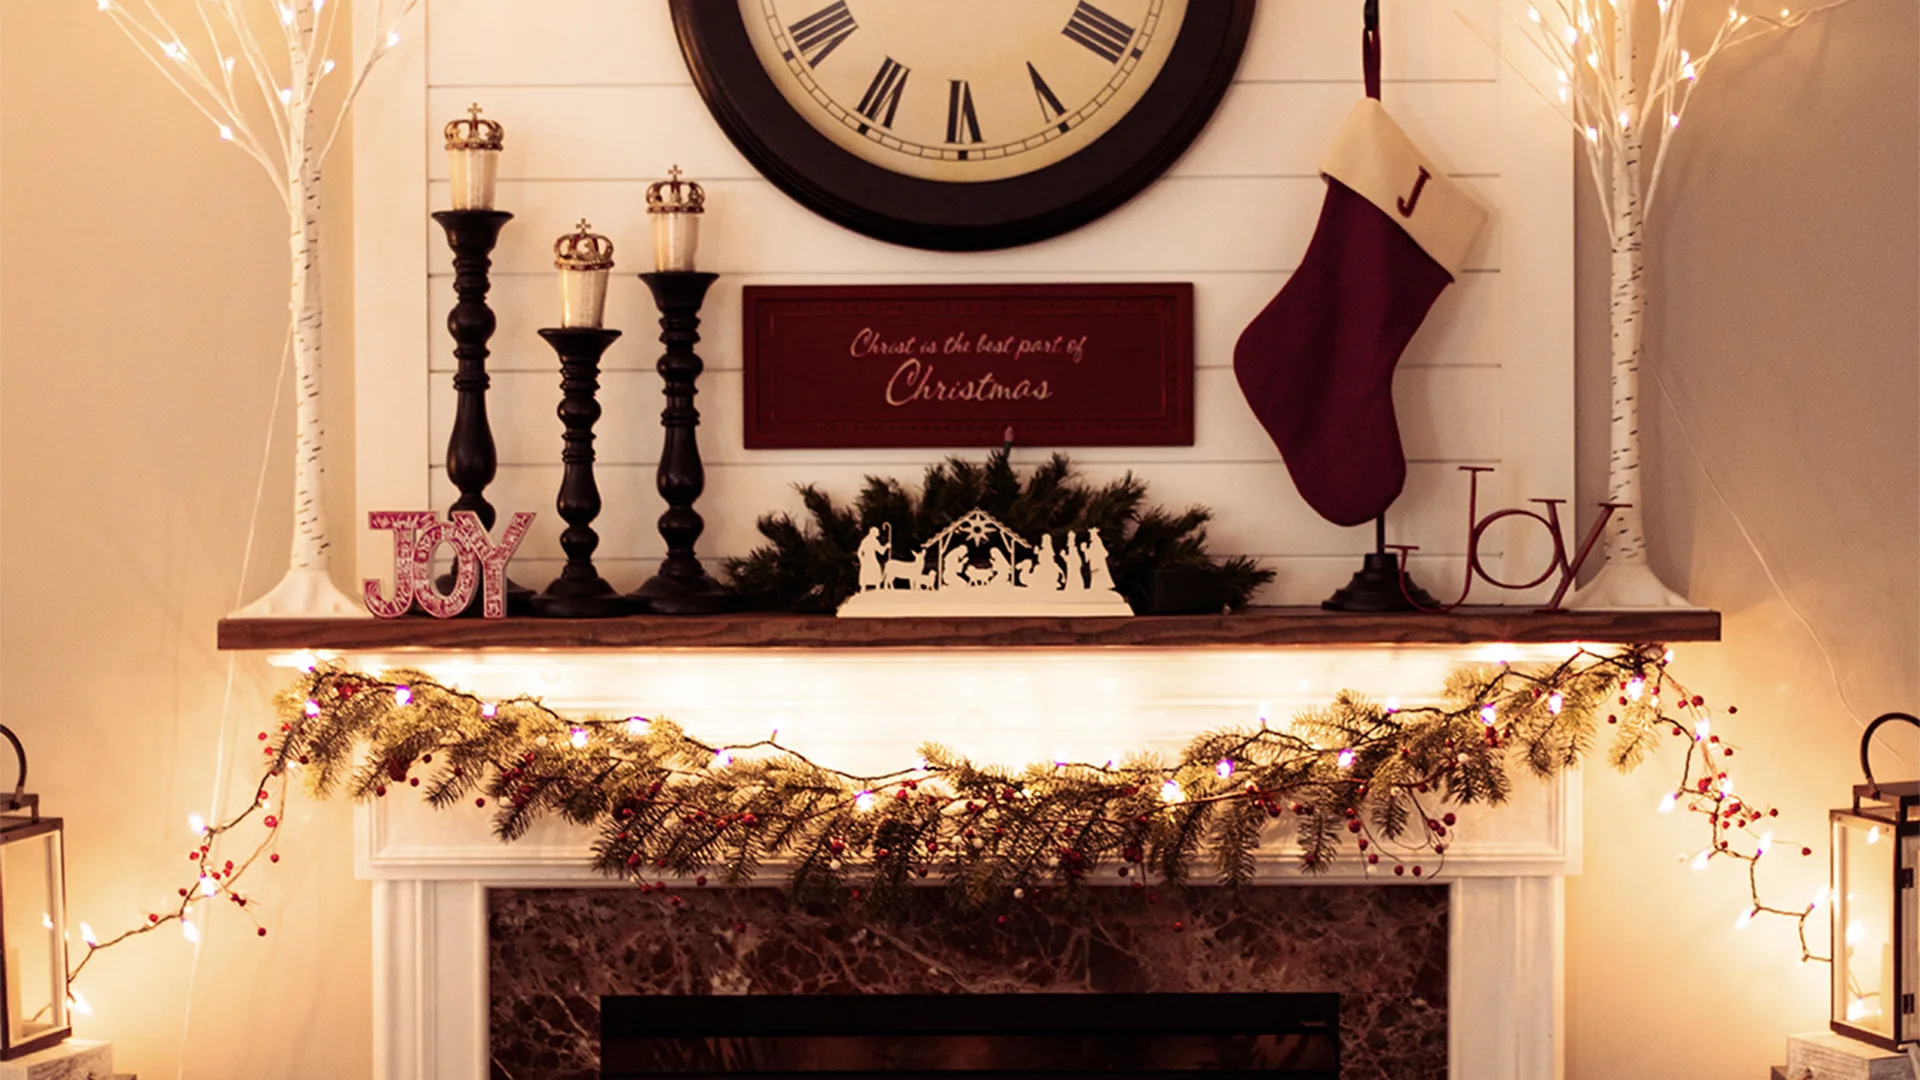 Christmas decorated fireplace with clock above